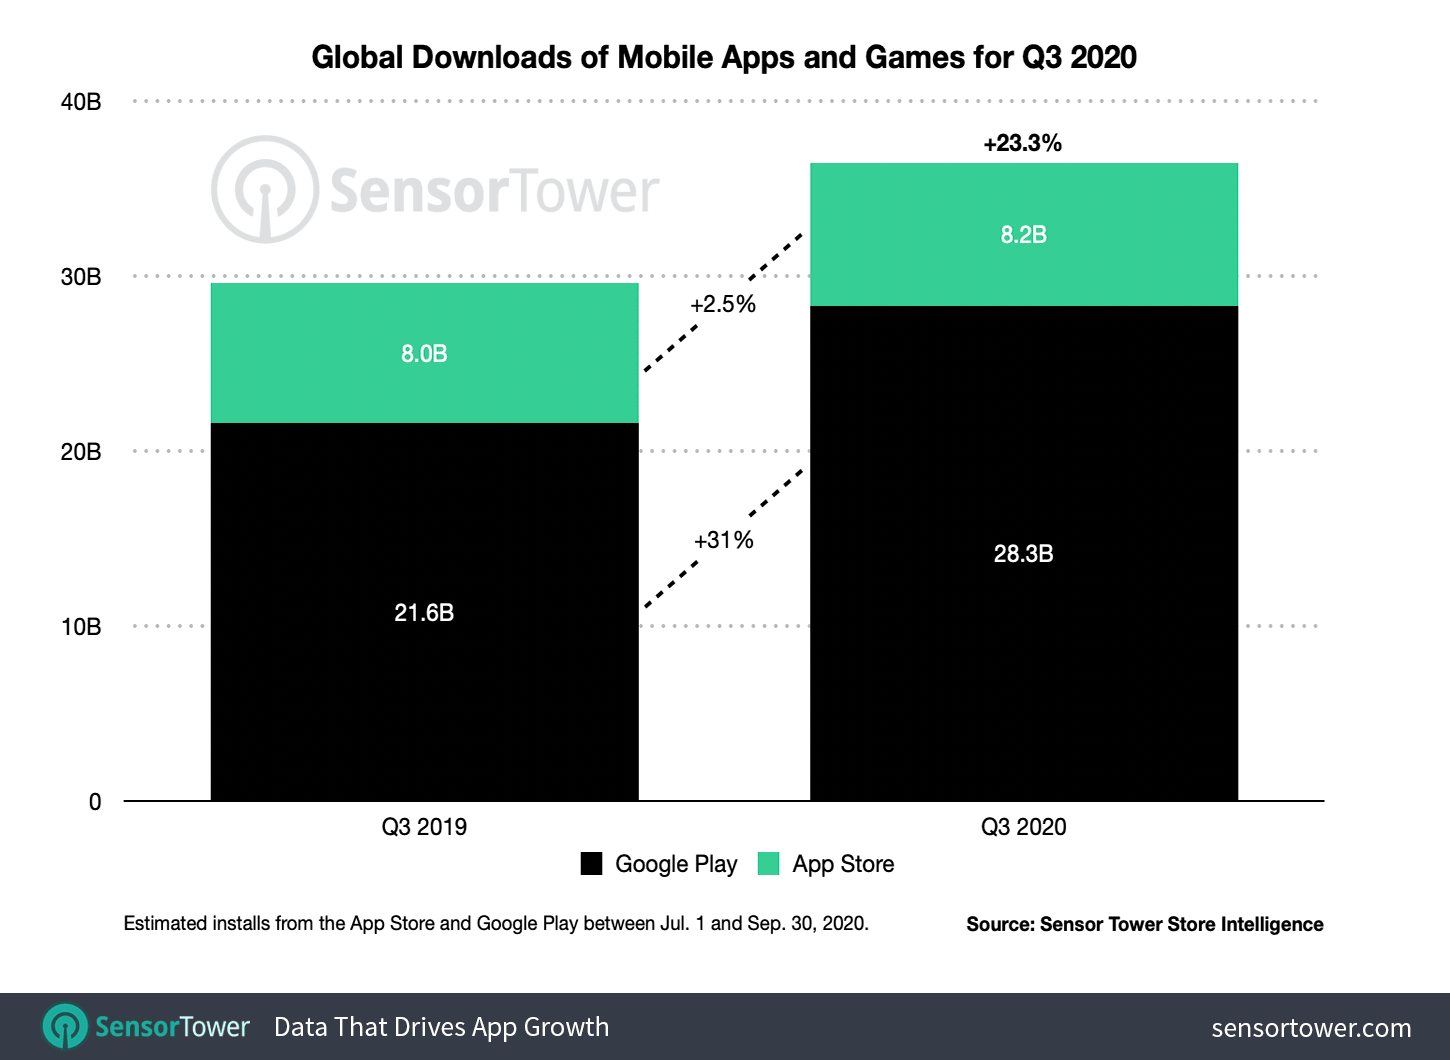 App Store Reportedly Earned Twice as Much as the Google Play Store in Q3  2020 | MacRumors Forums